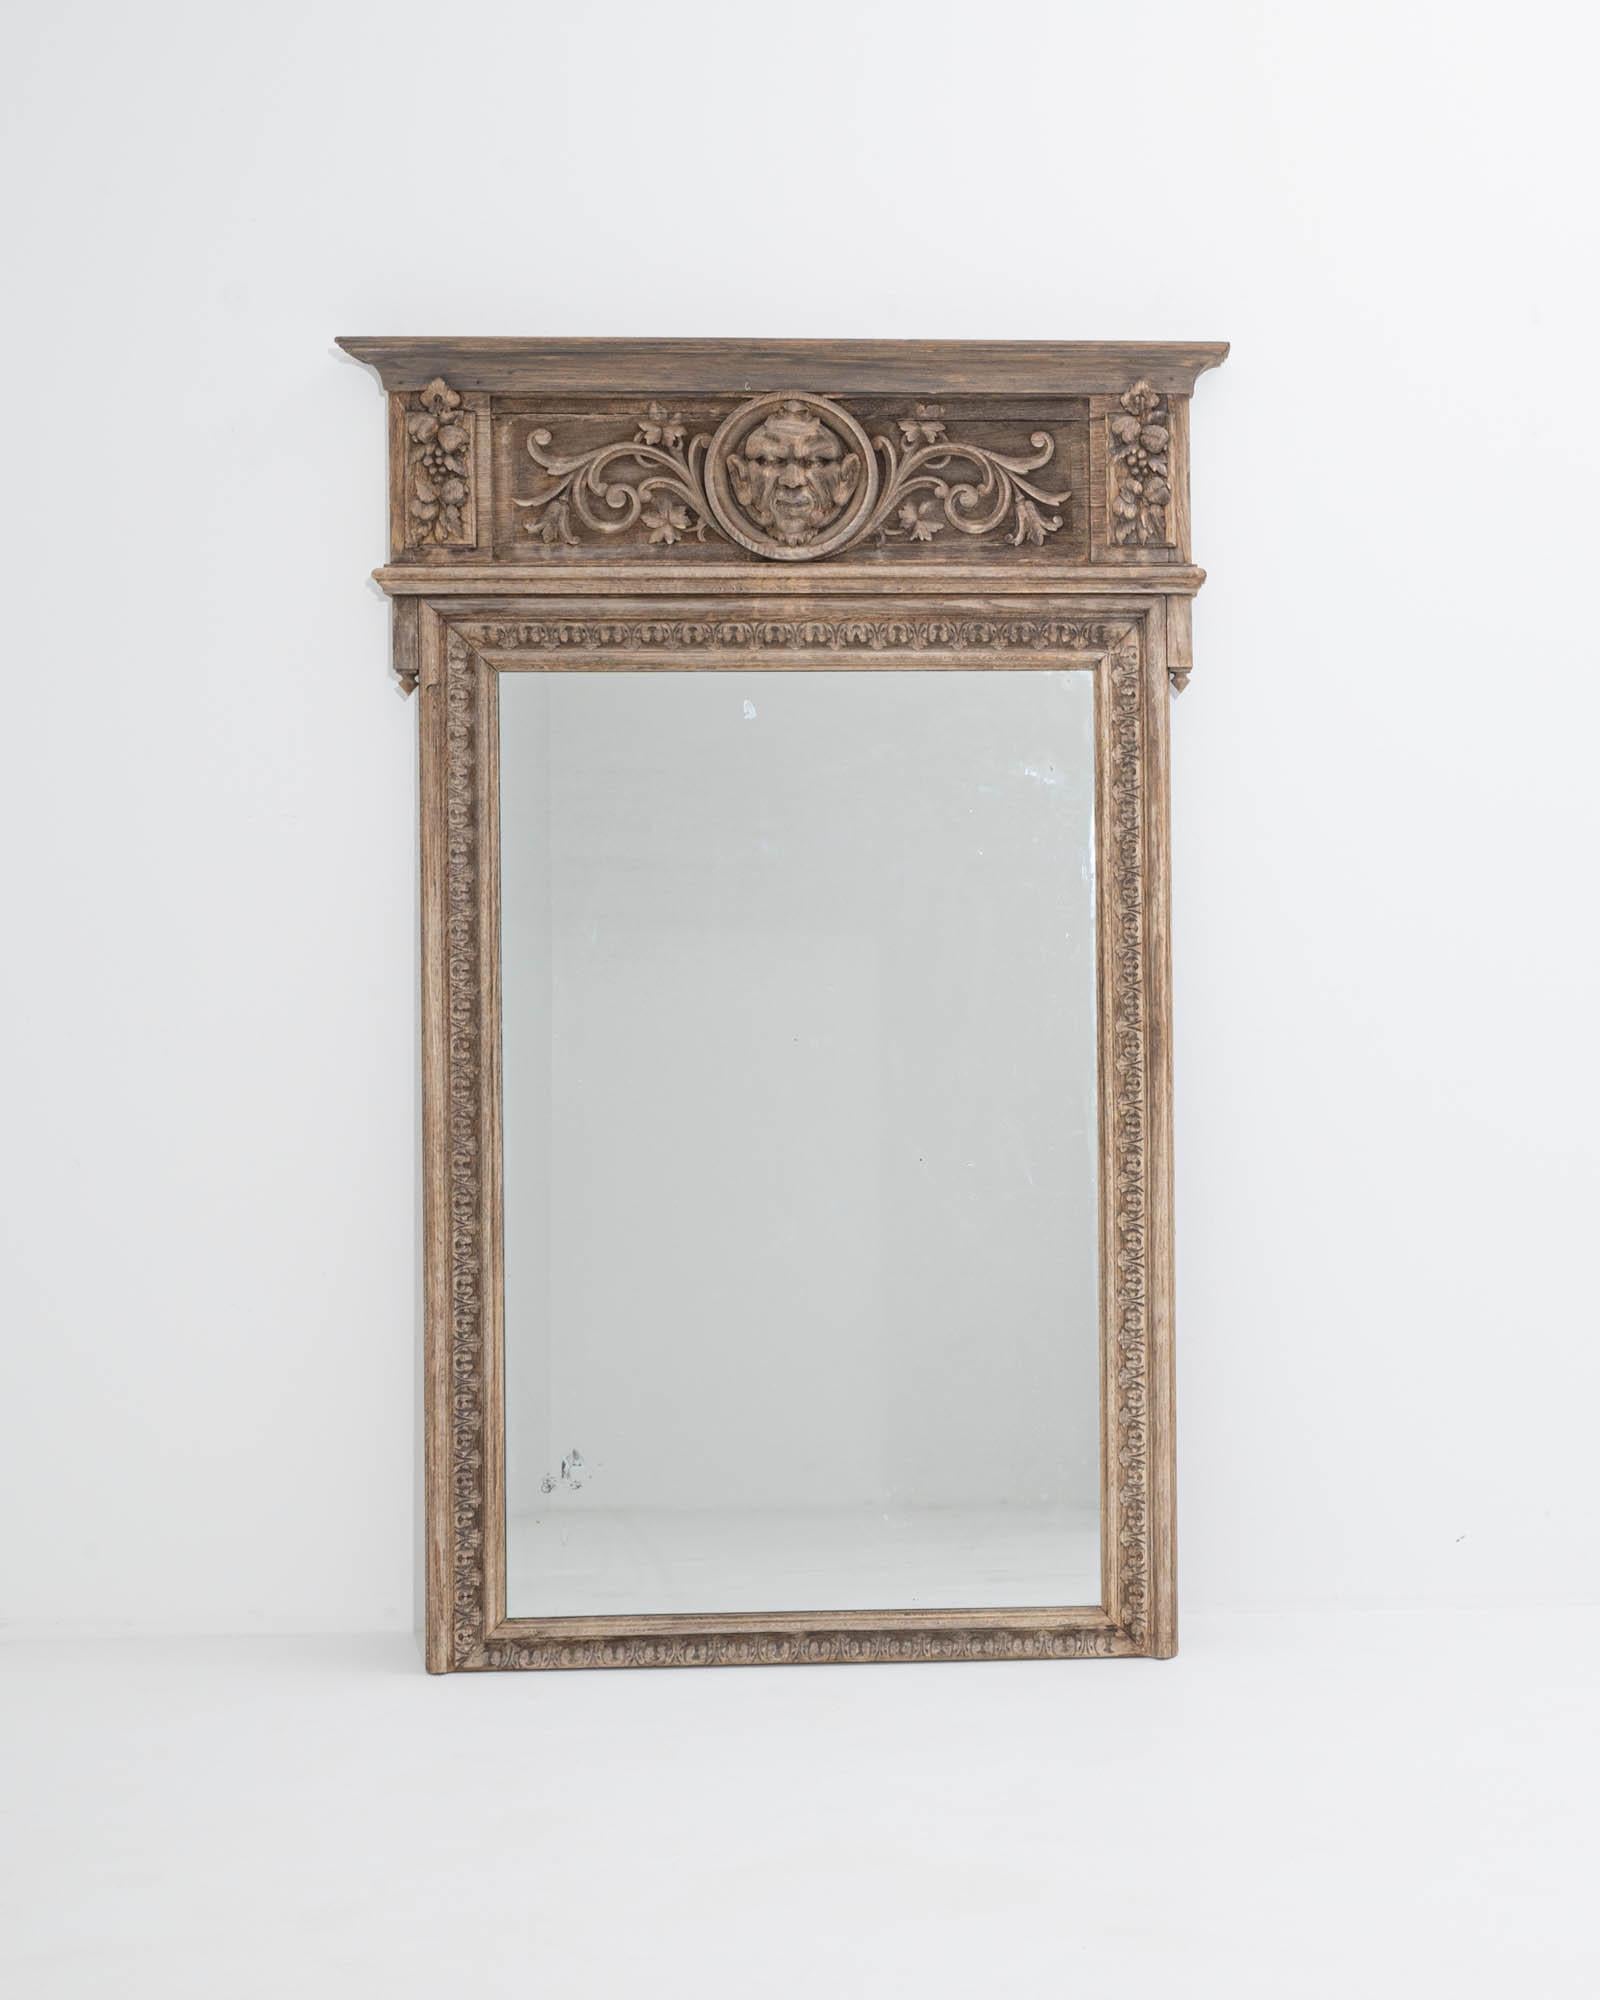 Stately yet vivacious, this antique mirror in natural oak is a masterly work of craftsmanship. Made in France in the 1800s, the design evokes the ornate aesthetics of Renaissance villas and palaces. The architectural proportions of the frame creates